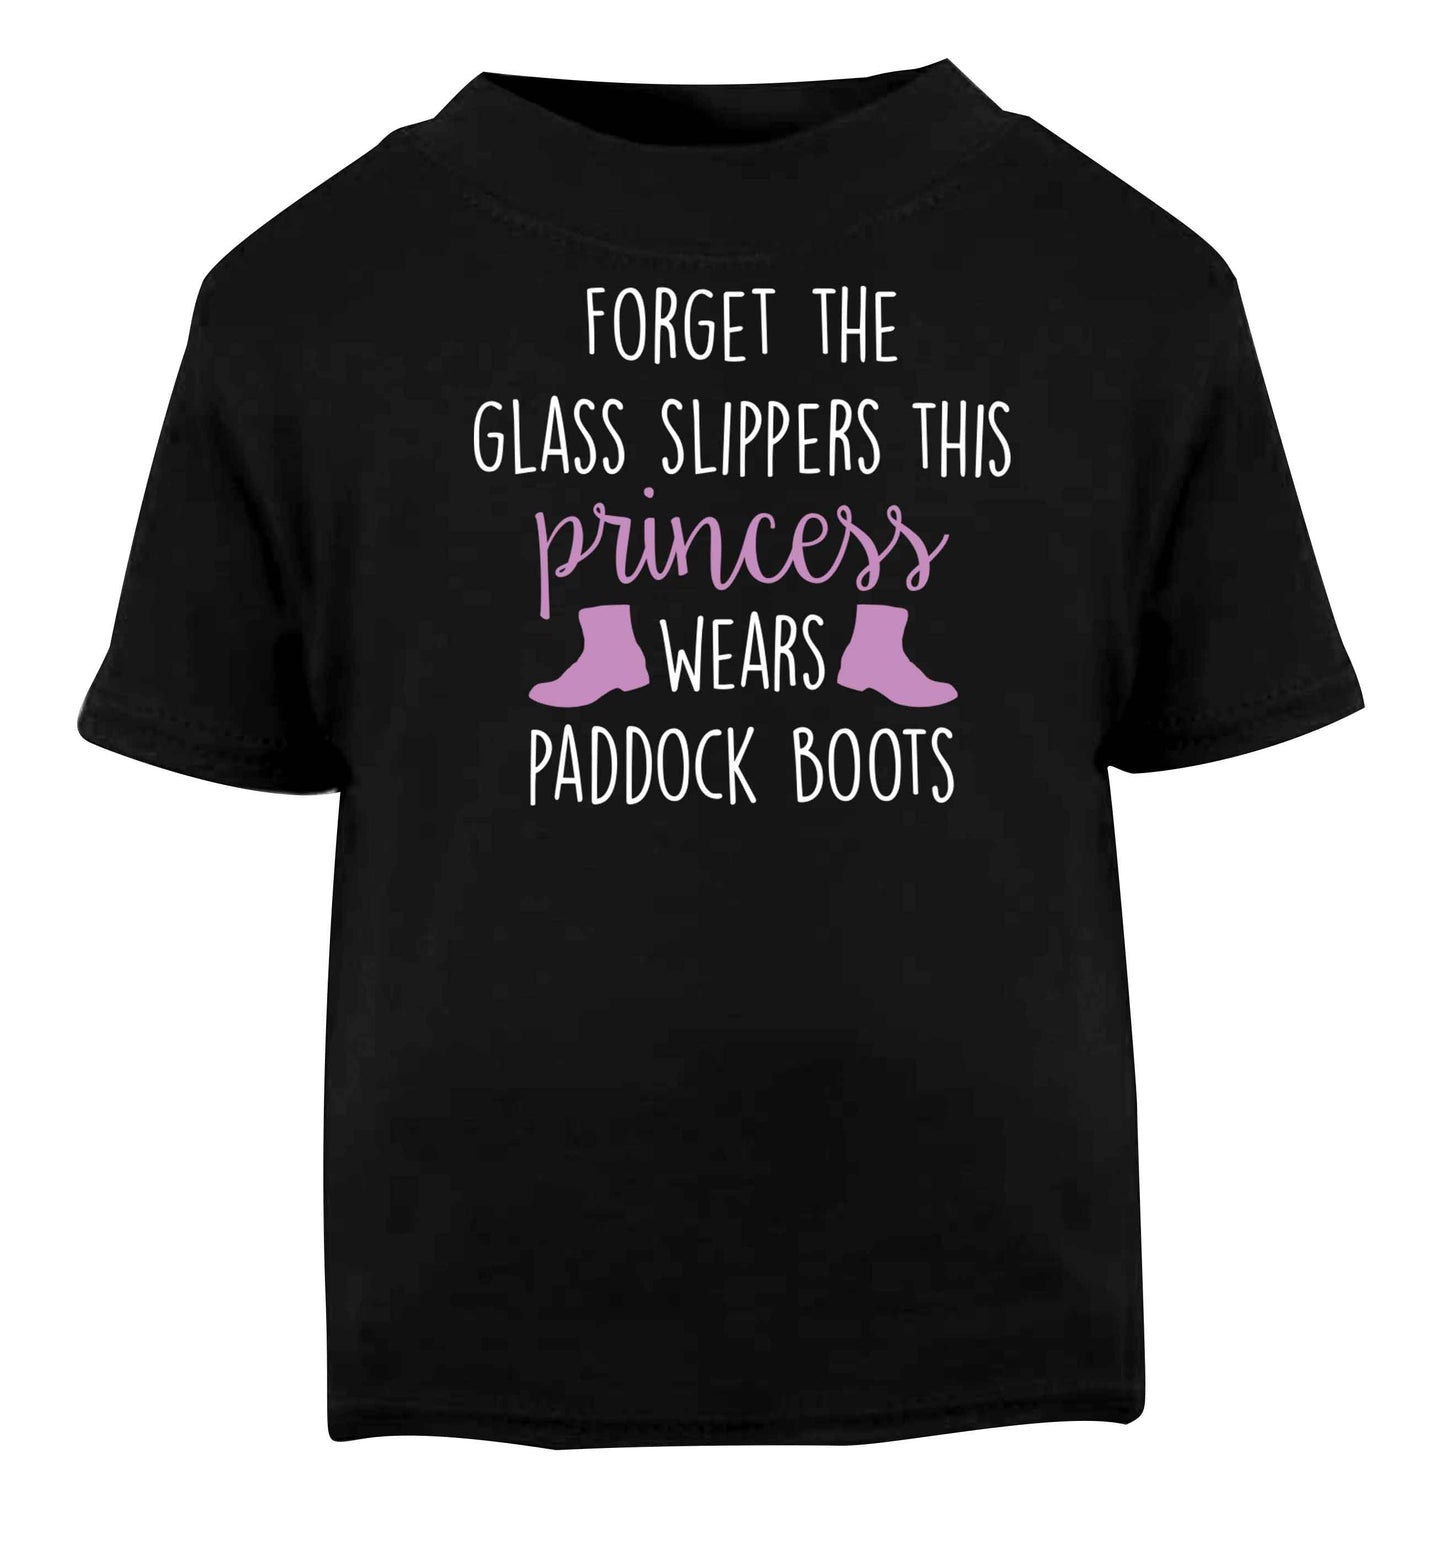 Forget the glass slippers this princess wears paddock boots Black baby toddler Tshirt 2 years